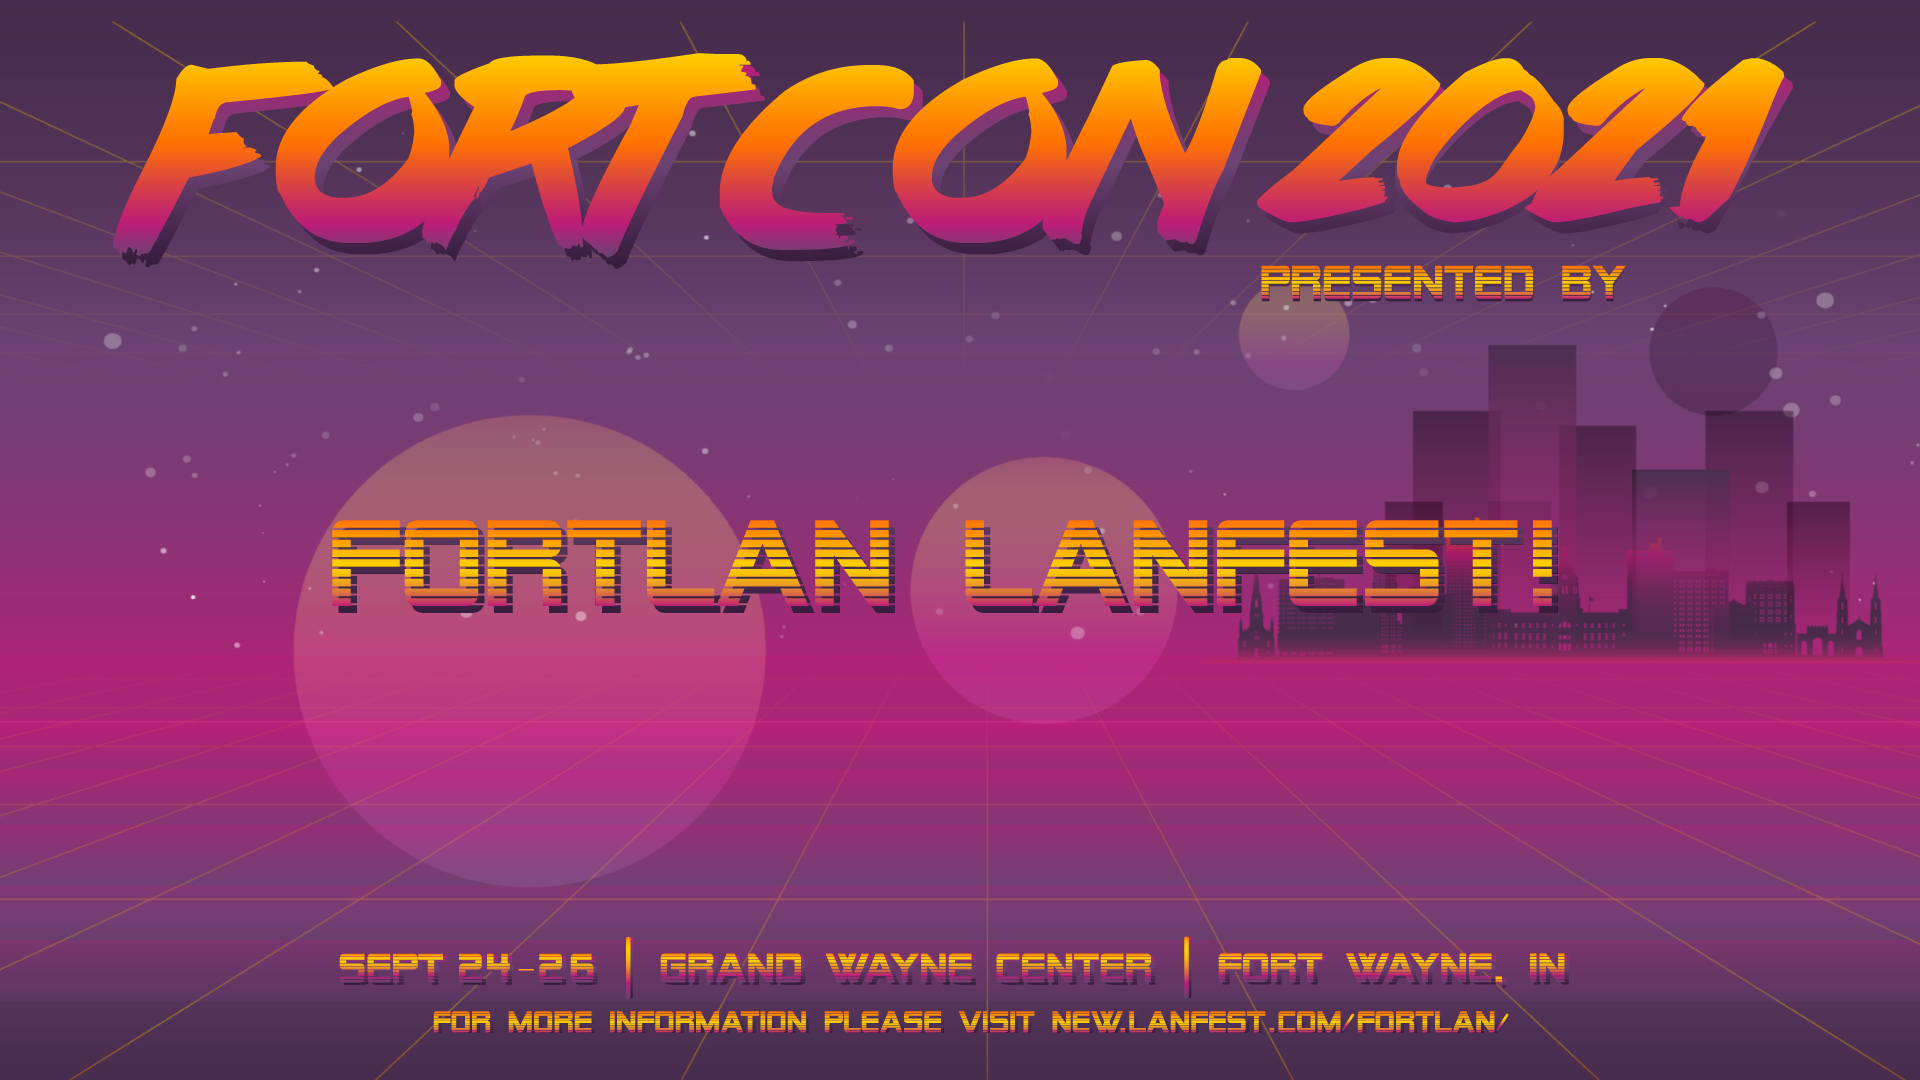 FortCon 2021 Announcement